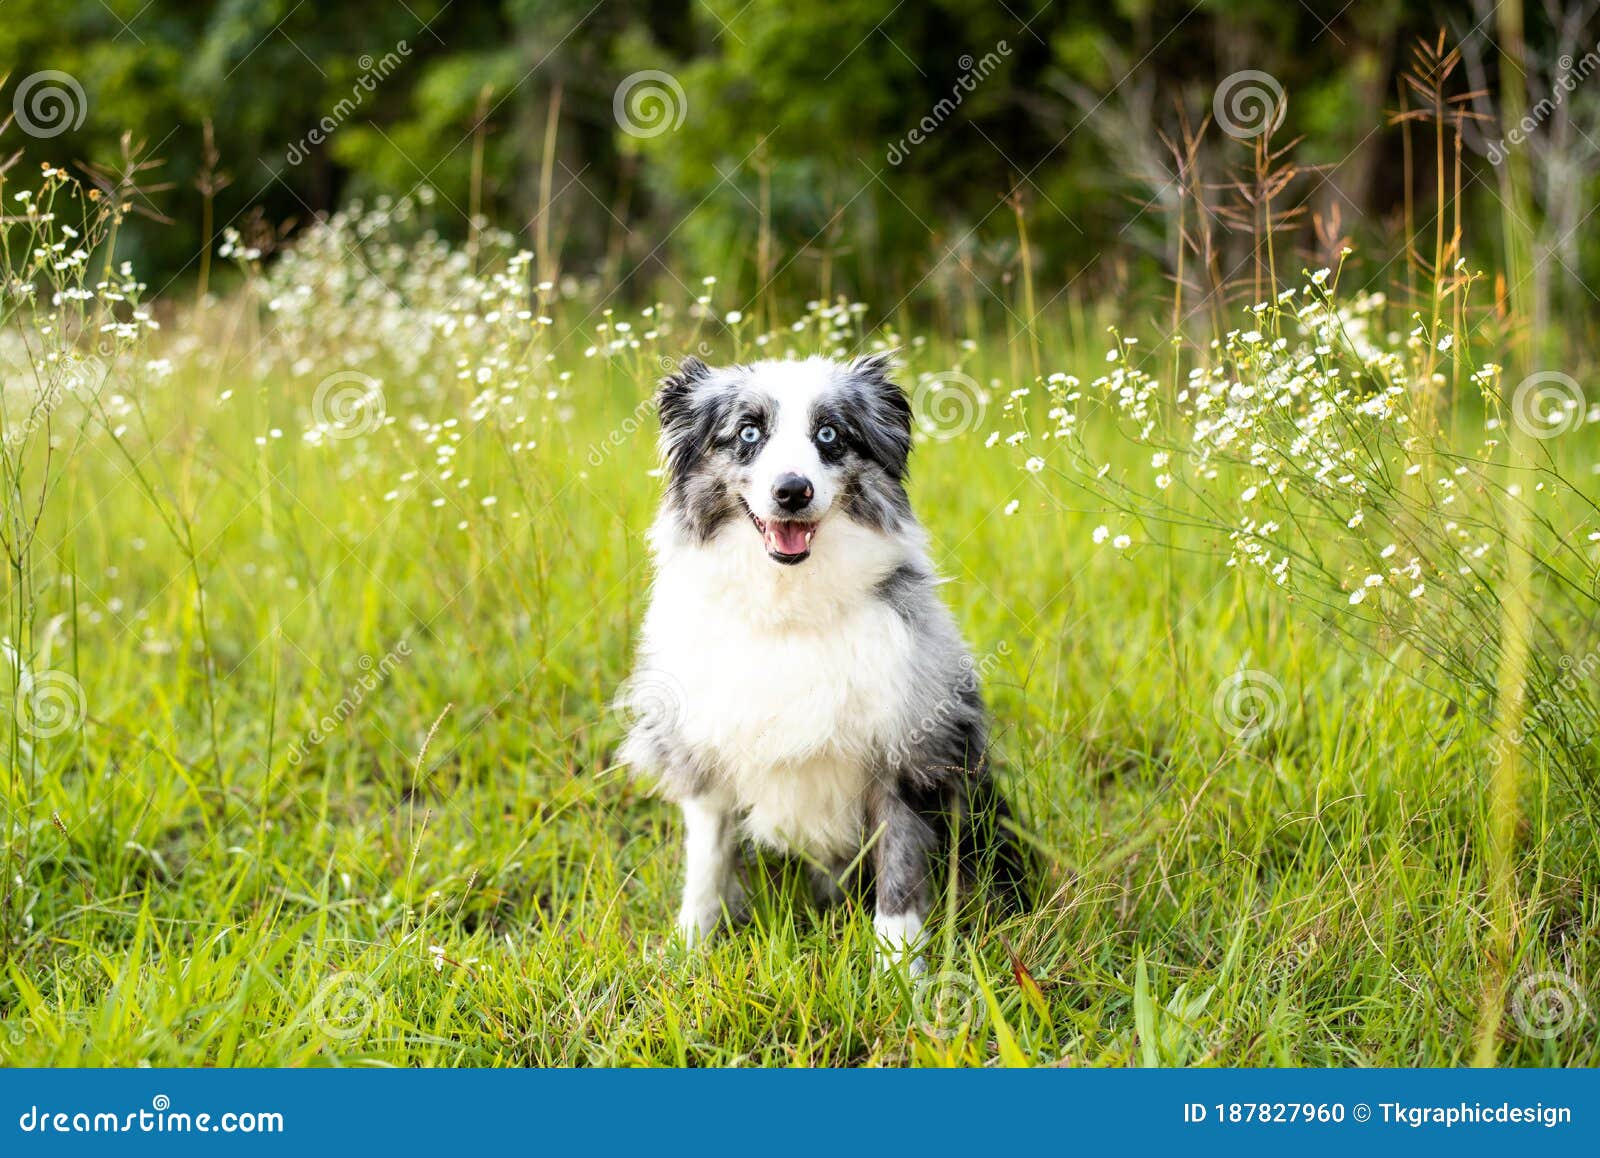 Australian Shepherd Mini Grey And White Aussie With Blue Eyes Stock Photo Image Of Natural Canine 187827960